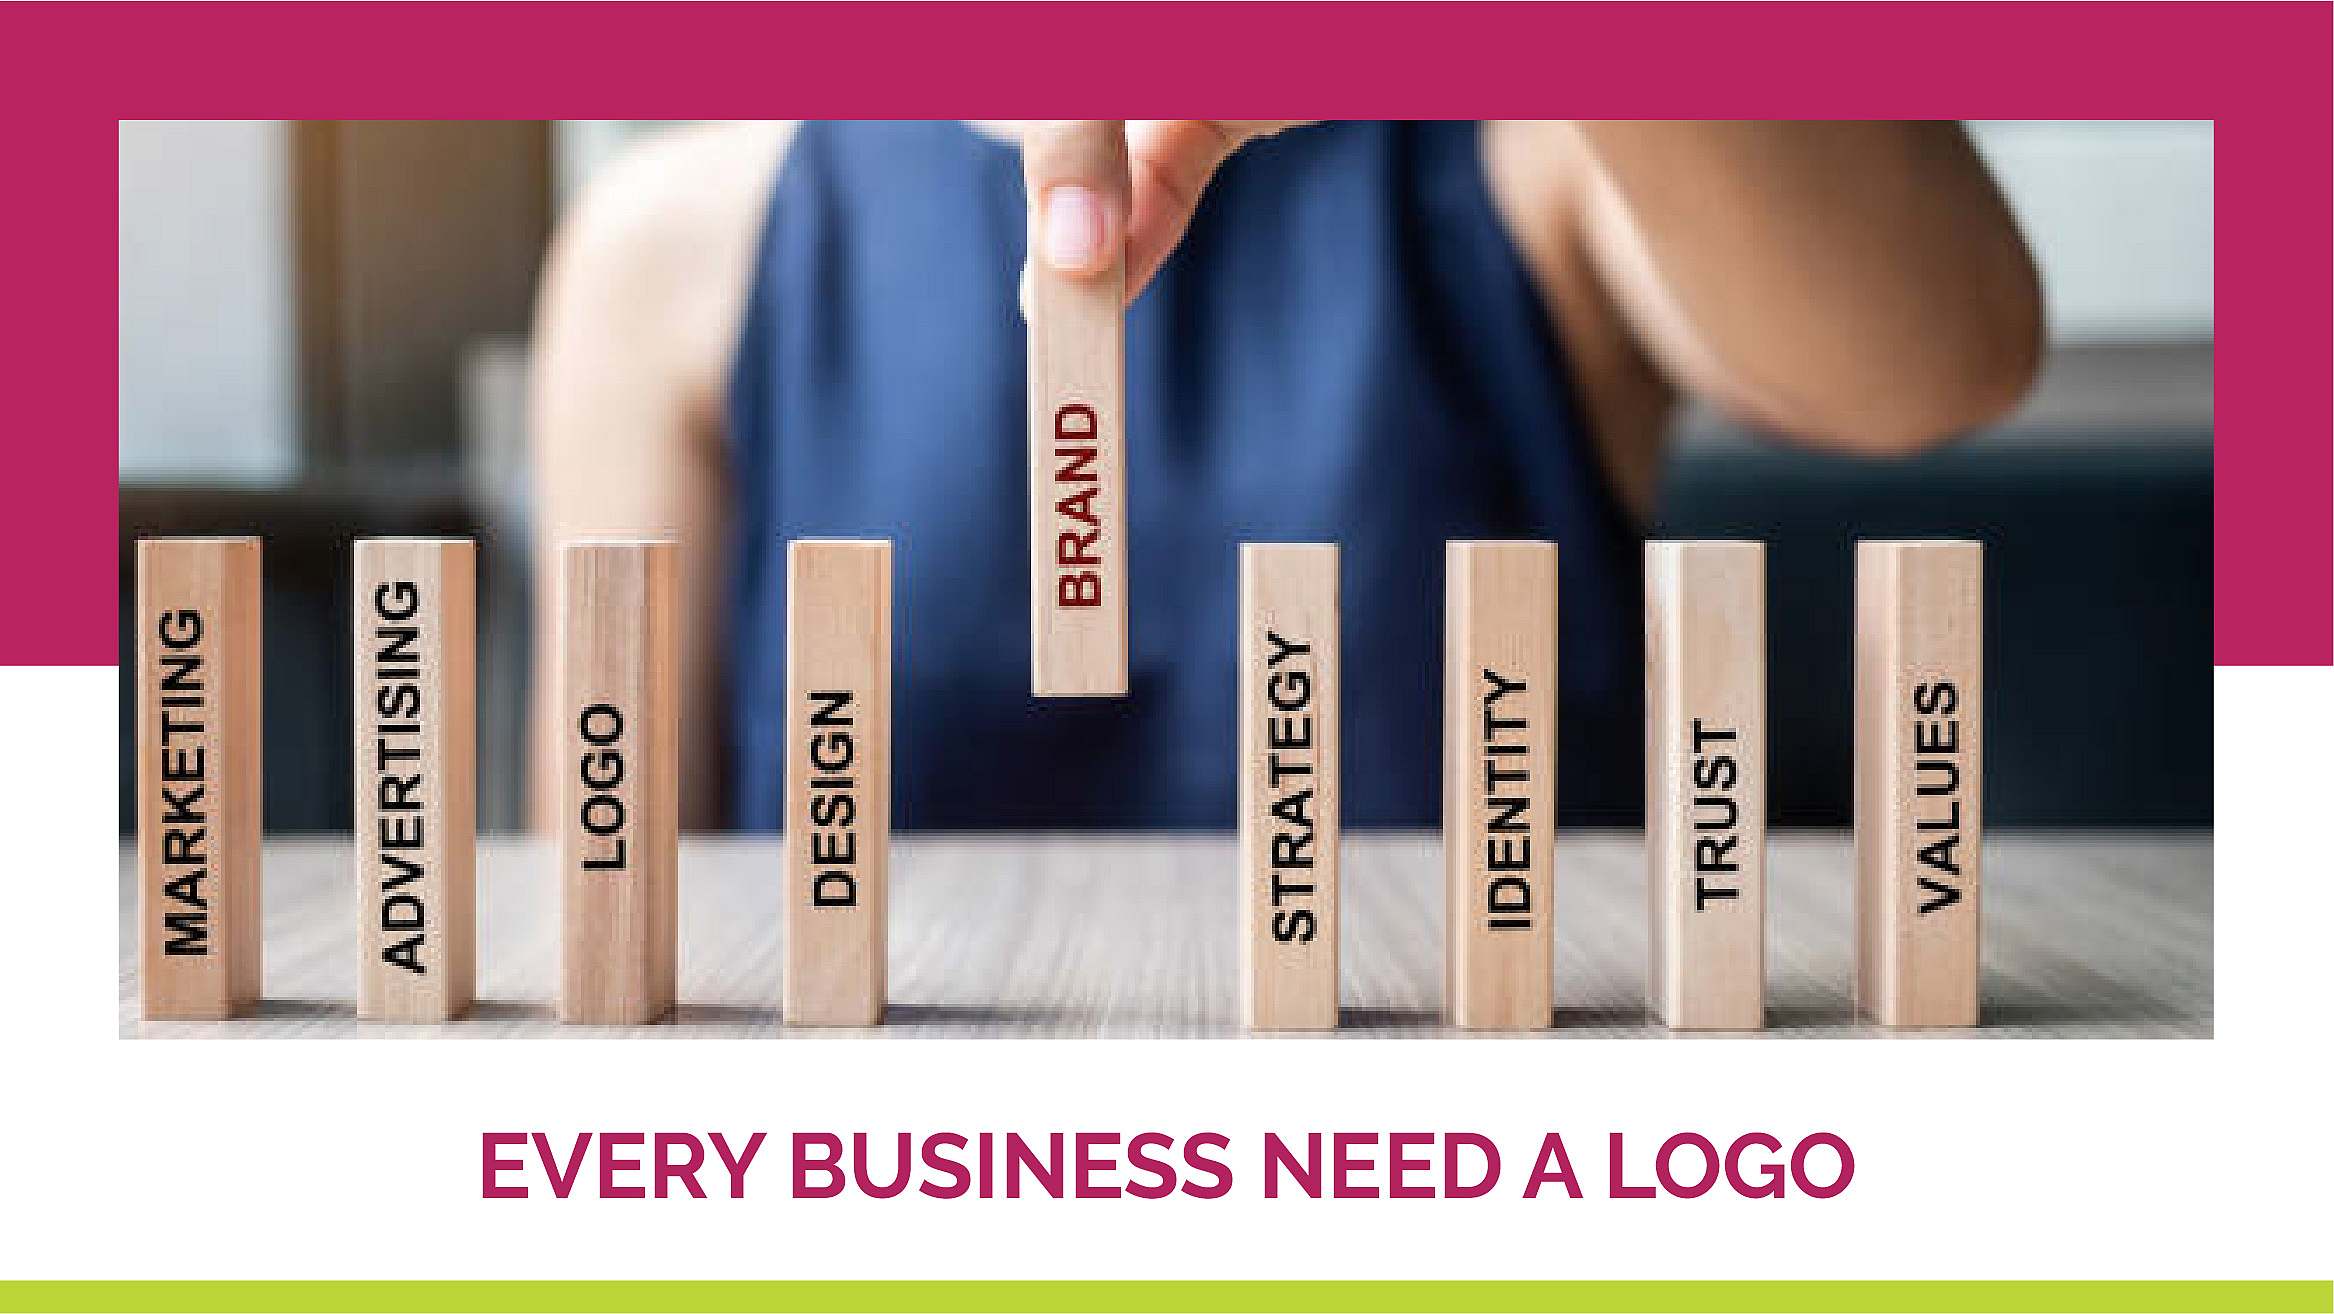 Give Your Business The Right Logo